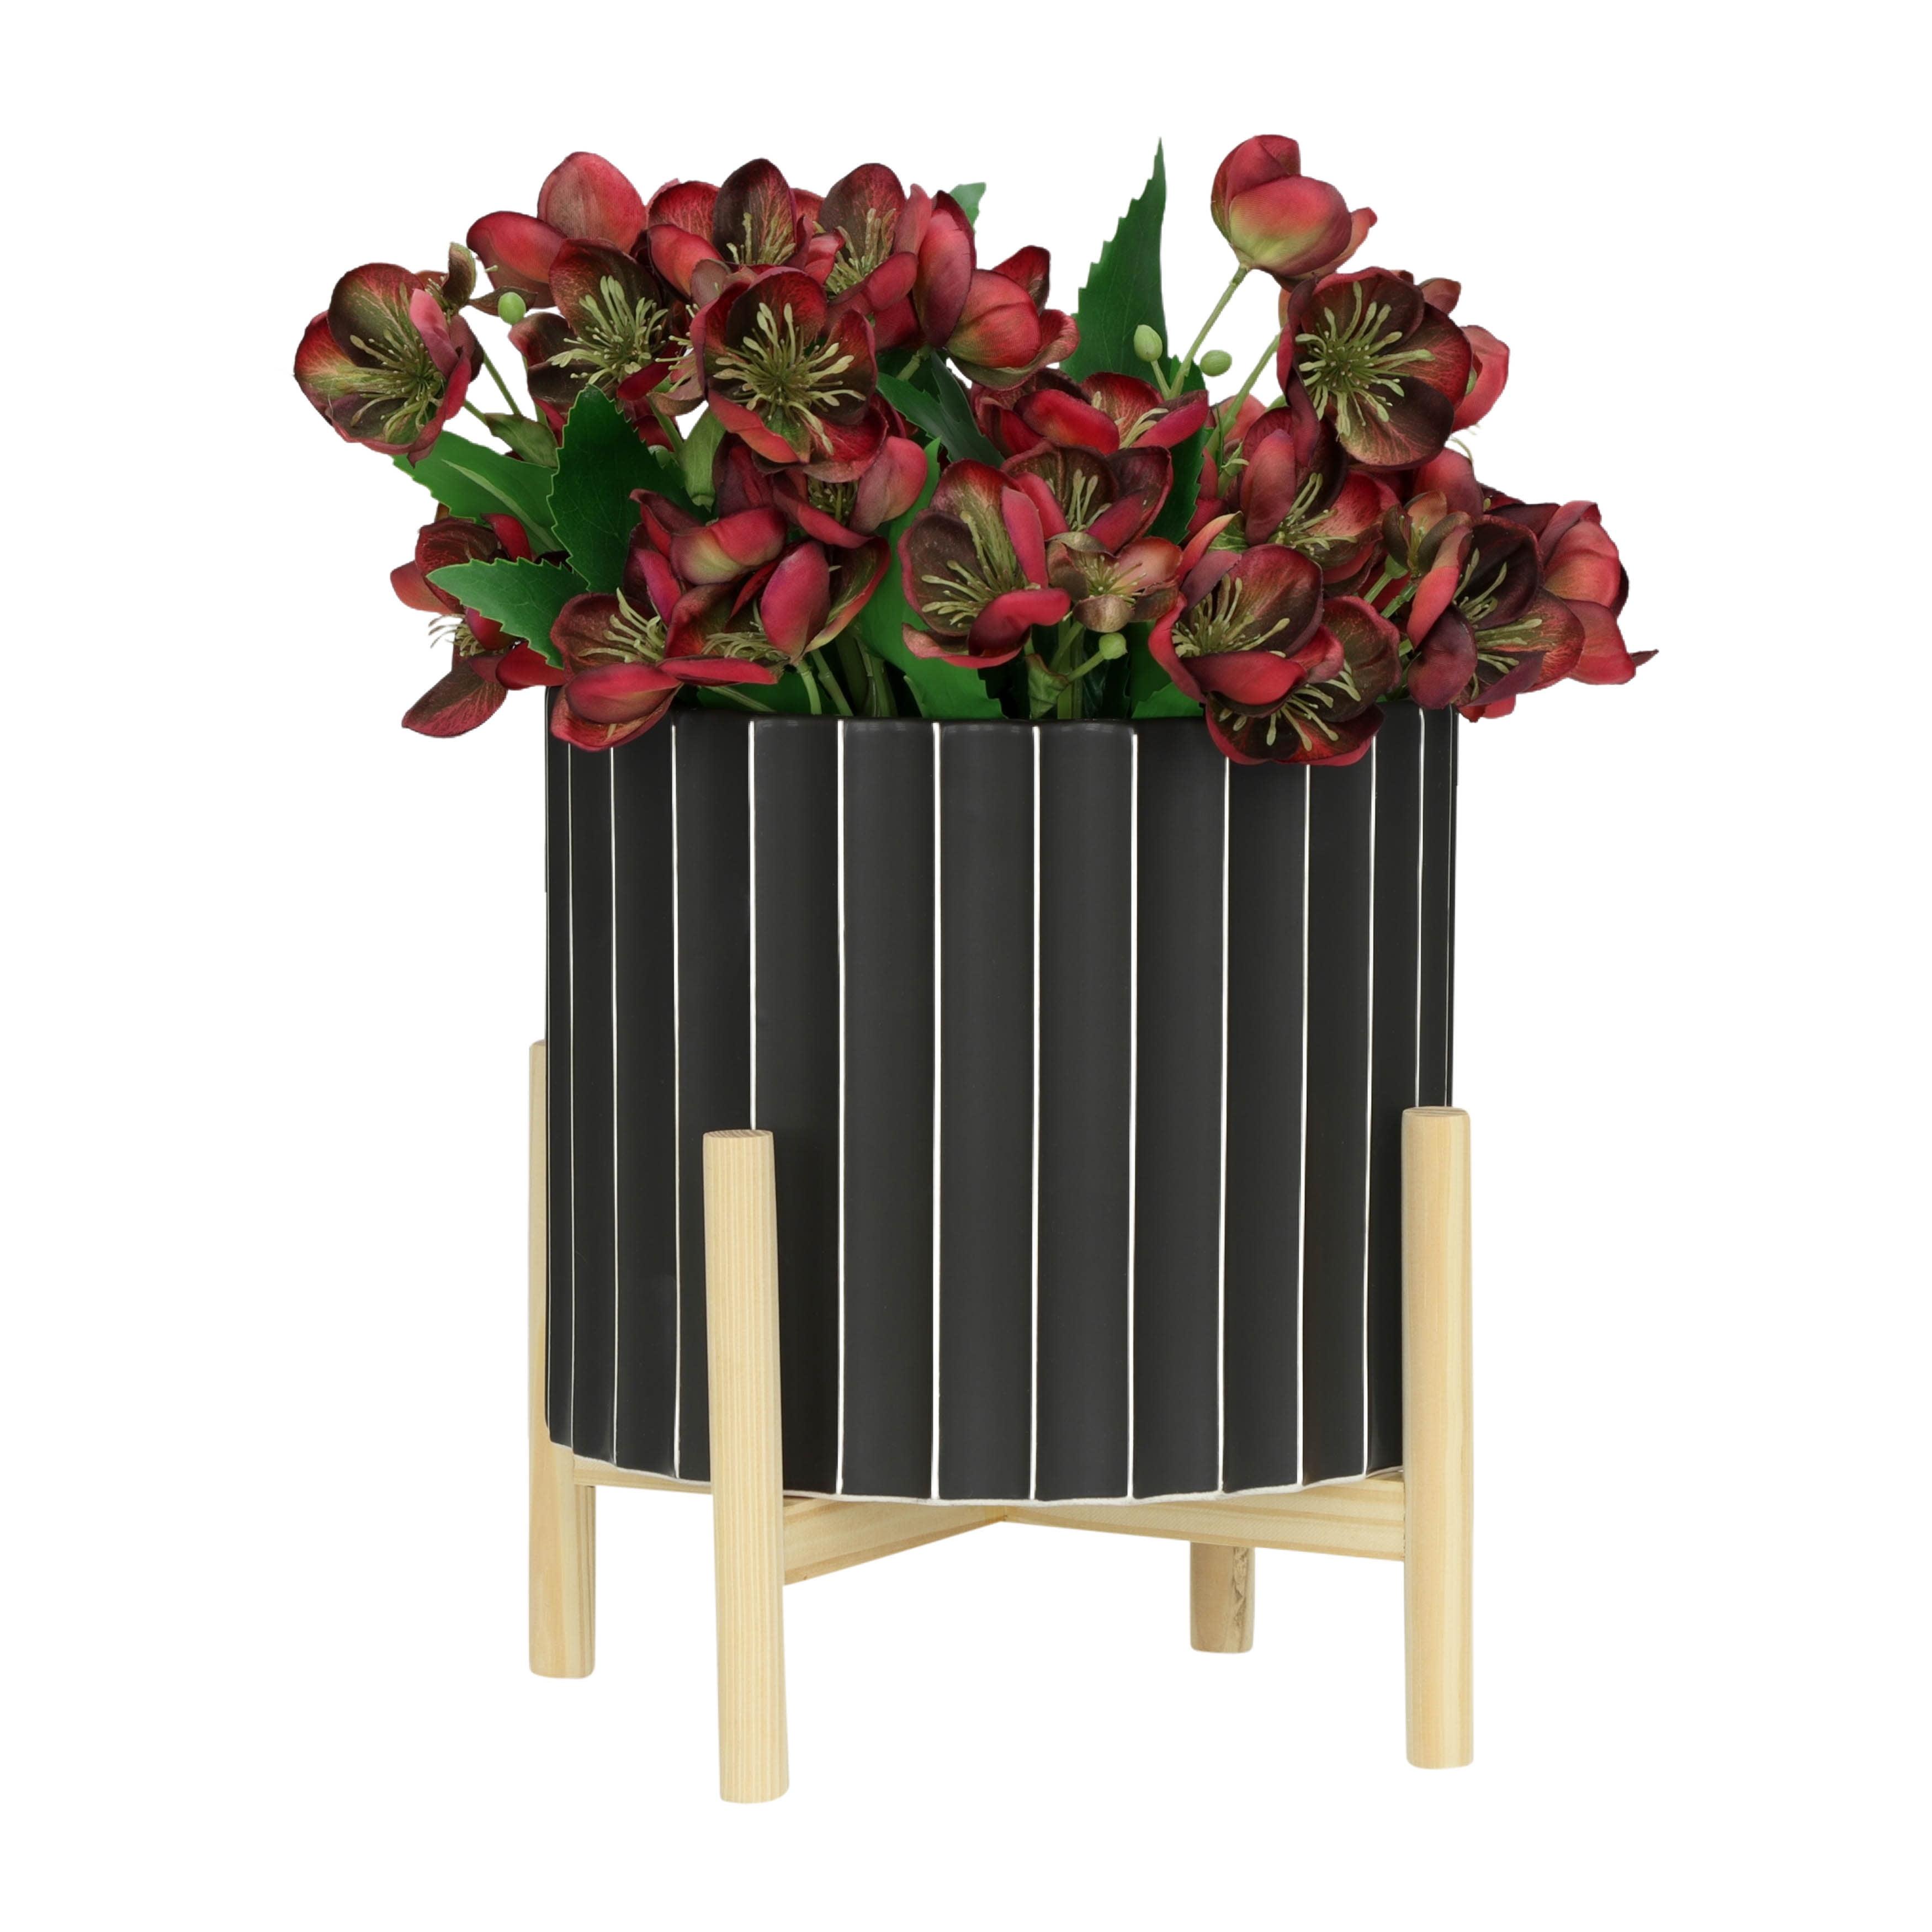 Contemporary Black Ceramic Fluted Planter with Wood Stand, 10"x11"